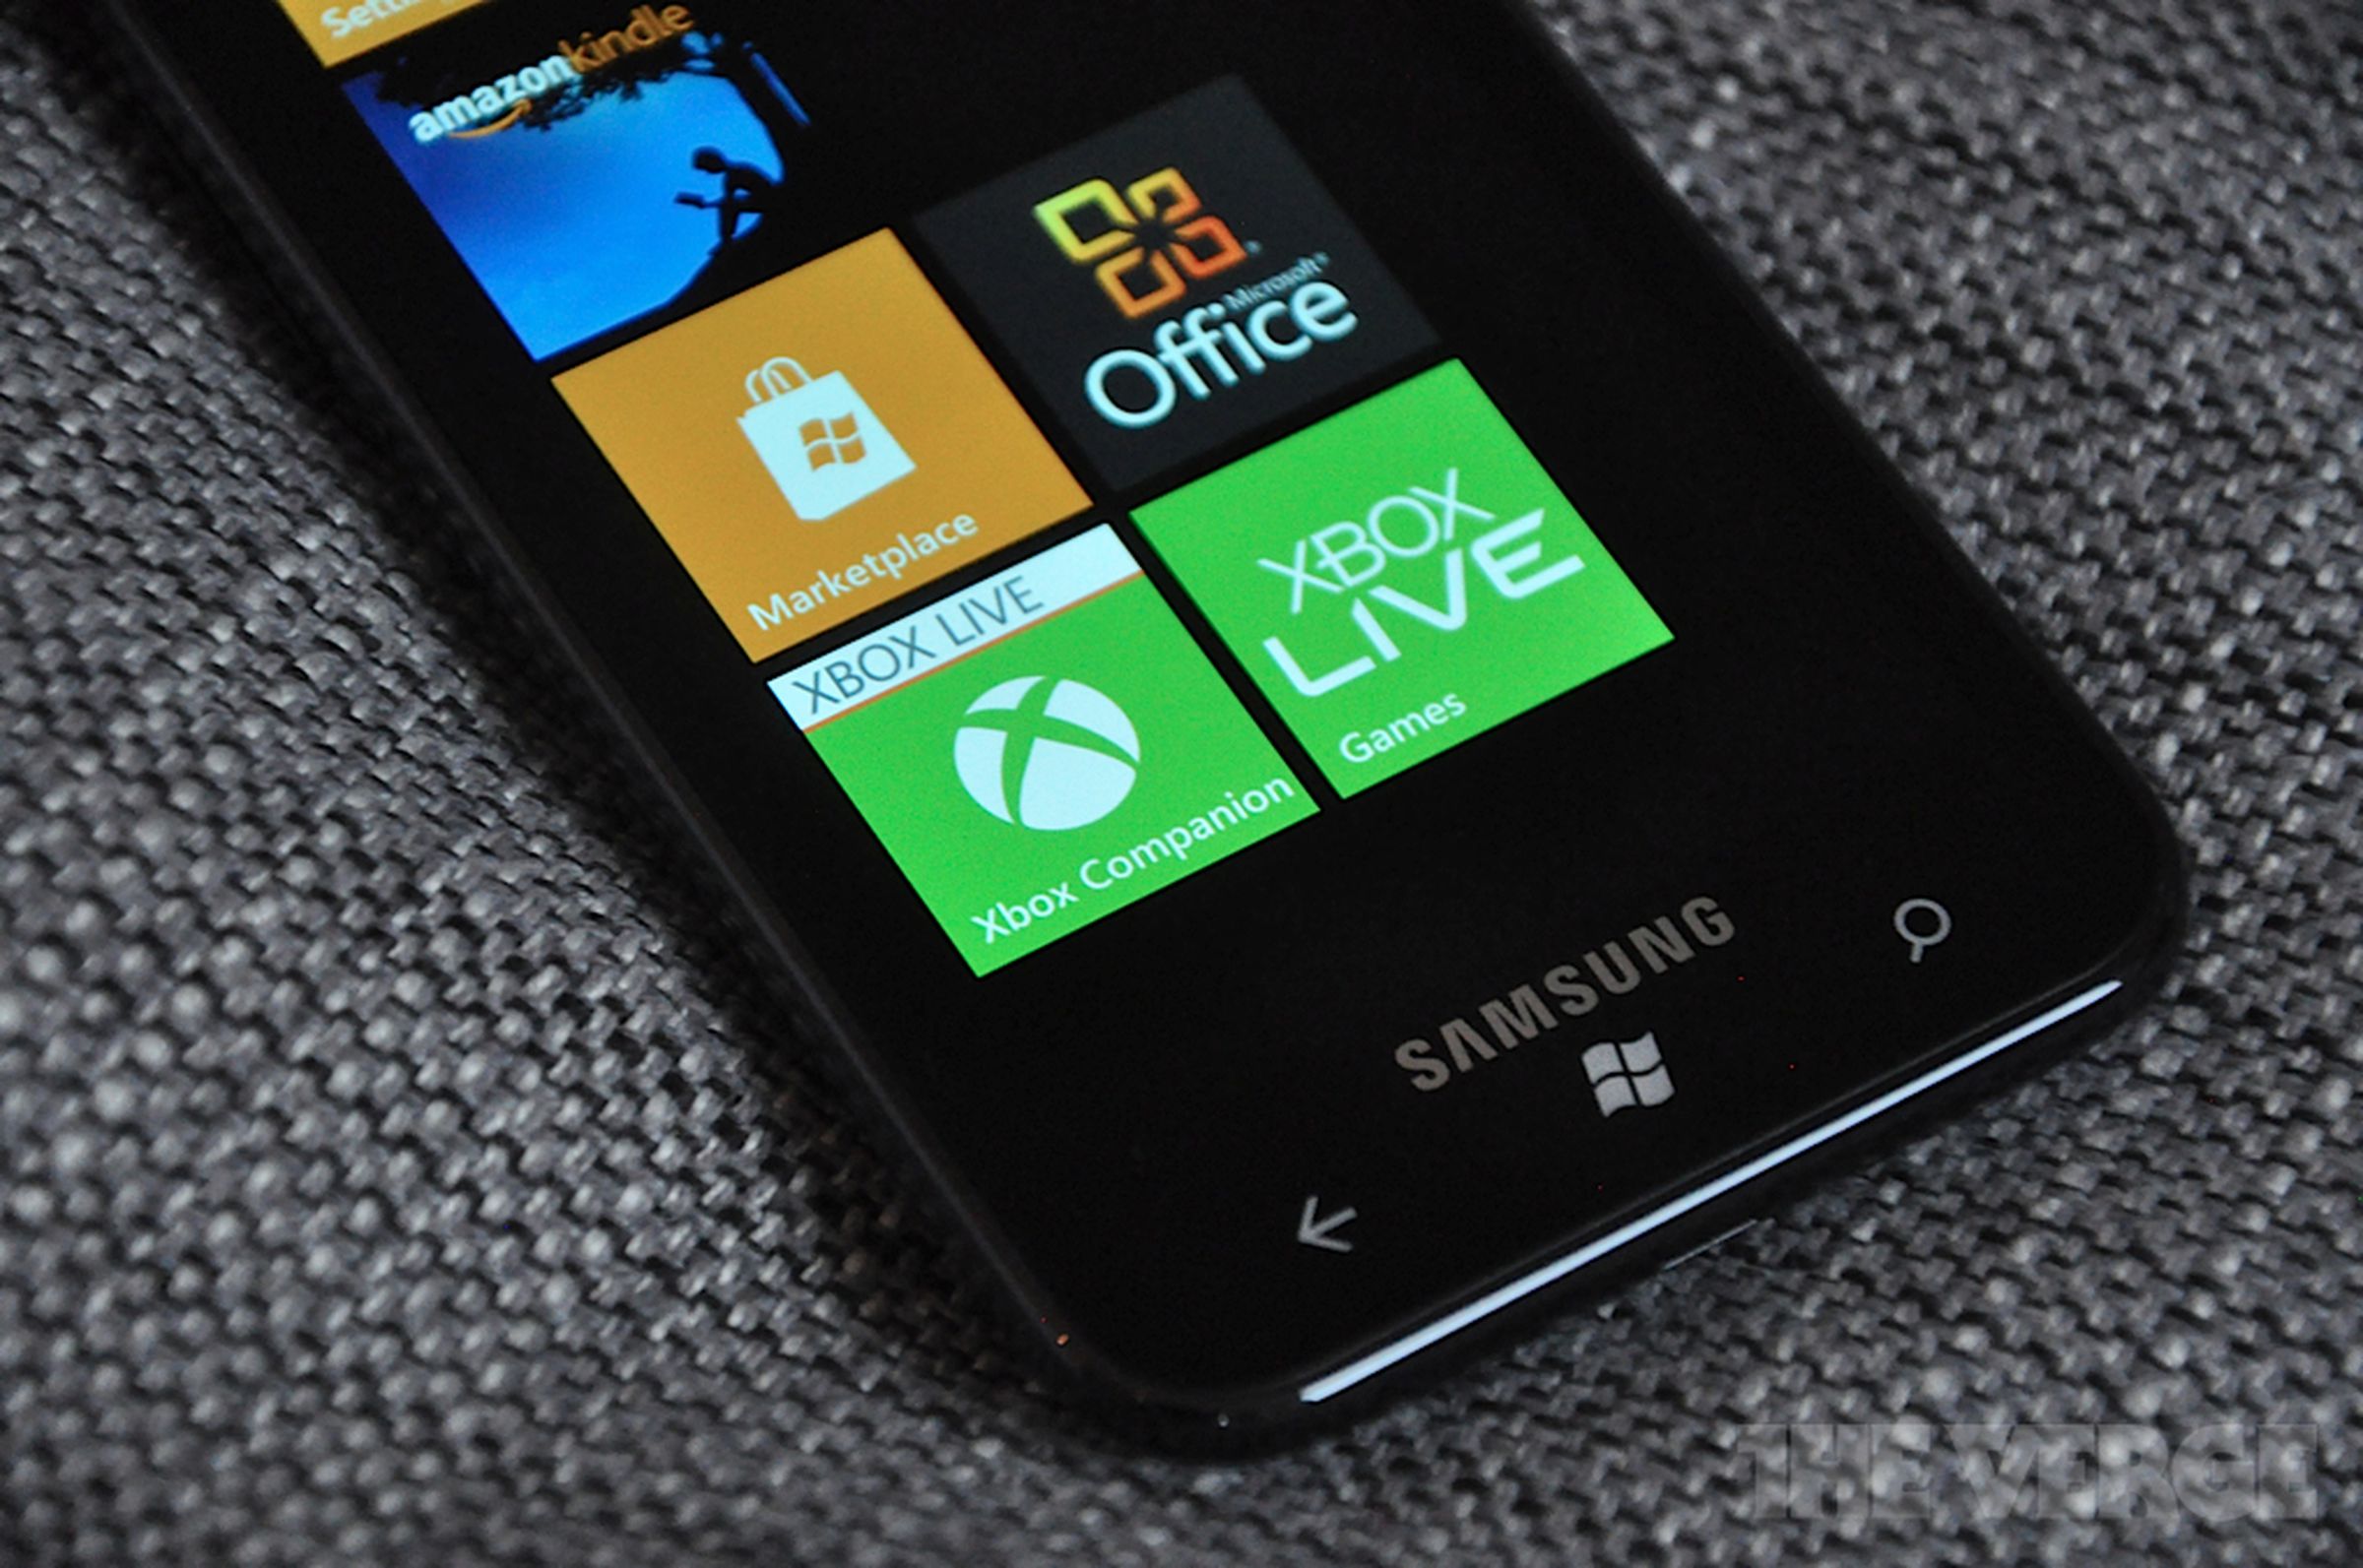 Xbox Companion for Windows Phone hands-on pictures and press images